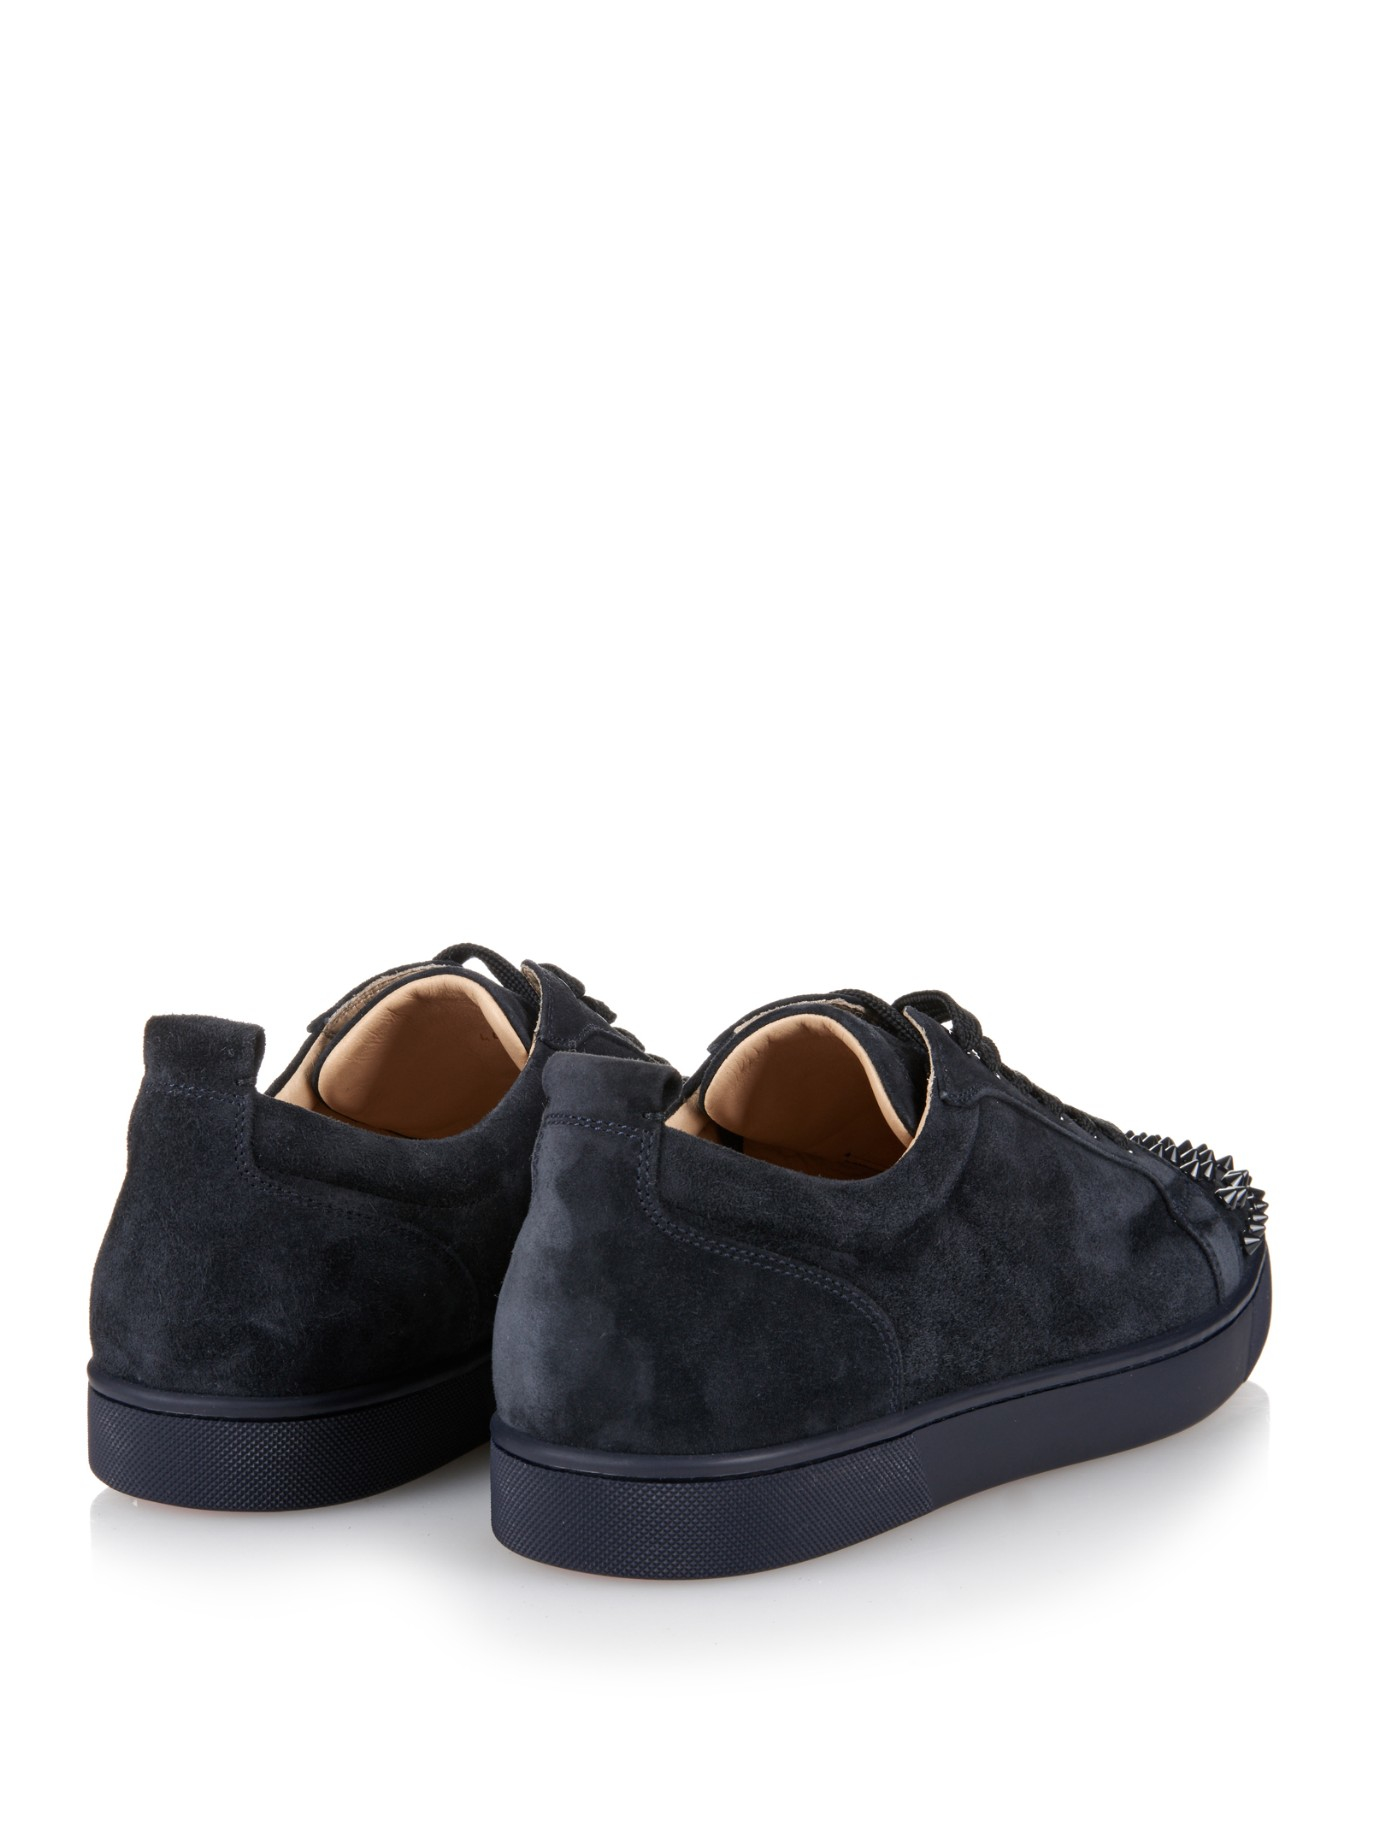 Christian Louboutin Louis Suede Low-Top Sneakers in Navy (Blue) for Men -  Lyst